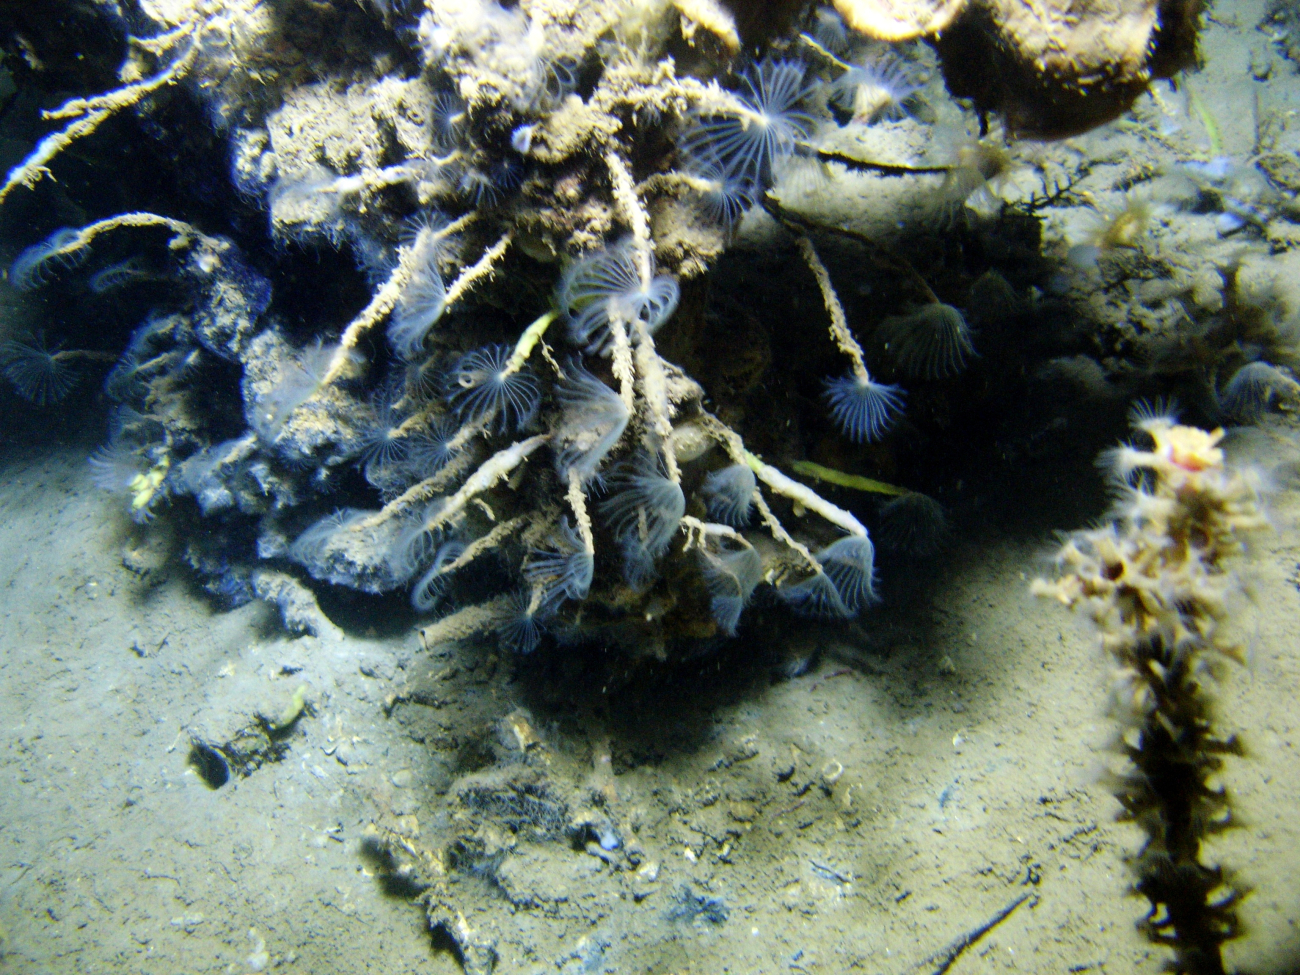 An outcrop in a cold seep area with numerous tube worms with feeding tentaclesextended